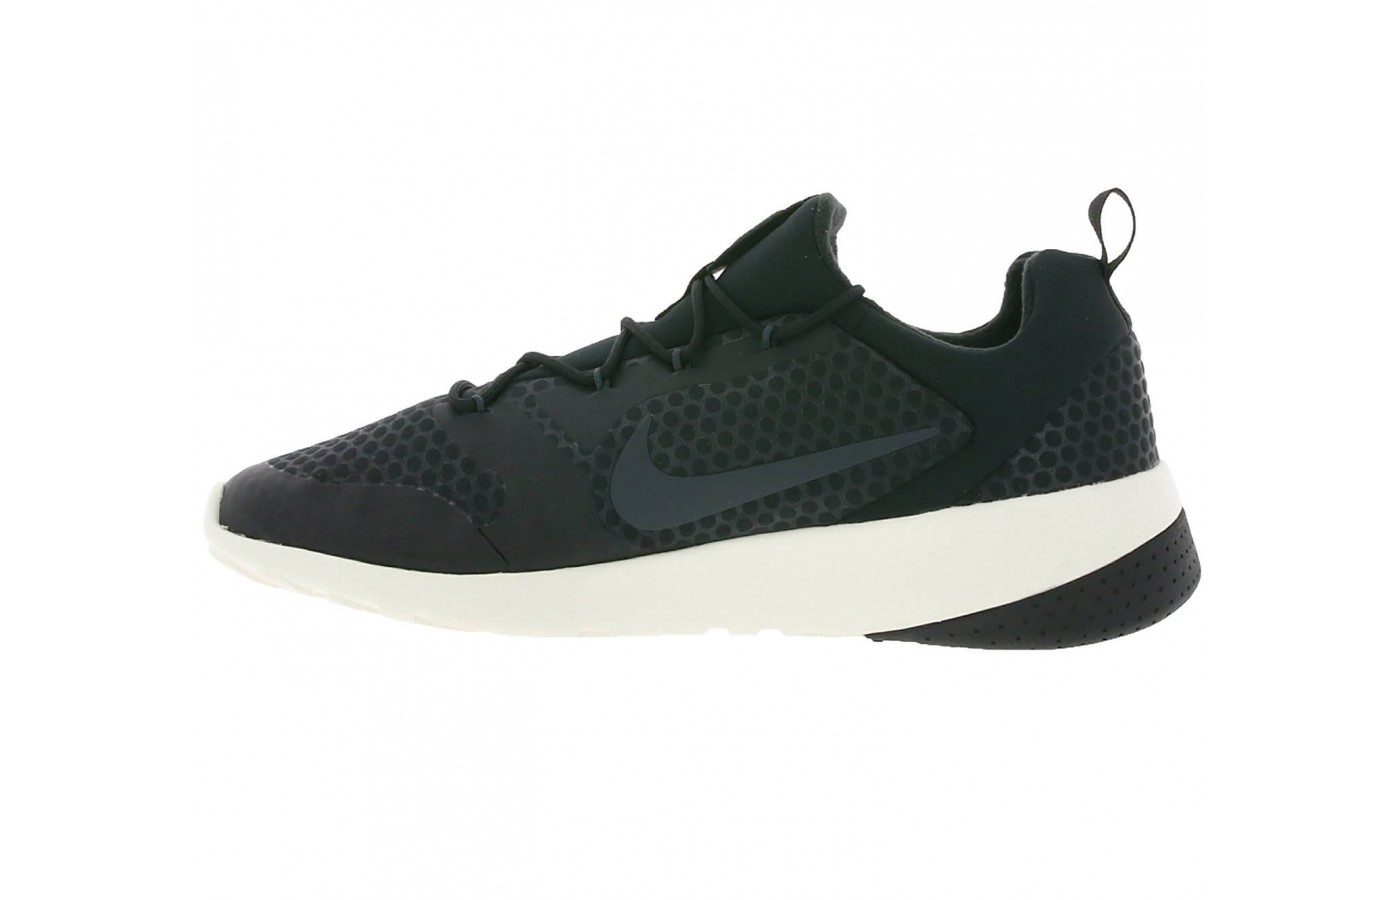 The closest approximation for what the Nike CK Racer's drop is would be around 9 mm.